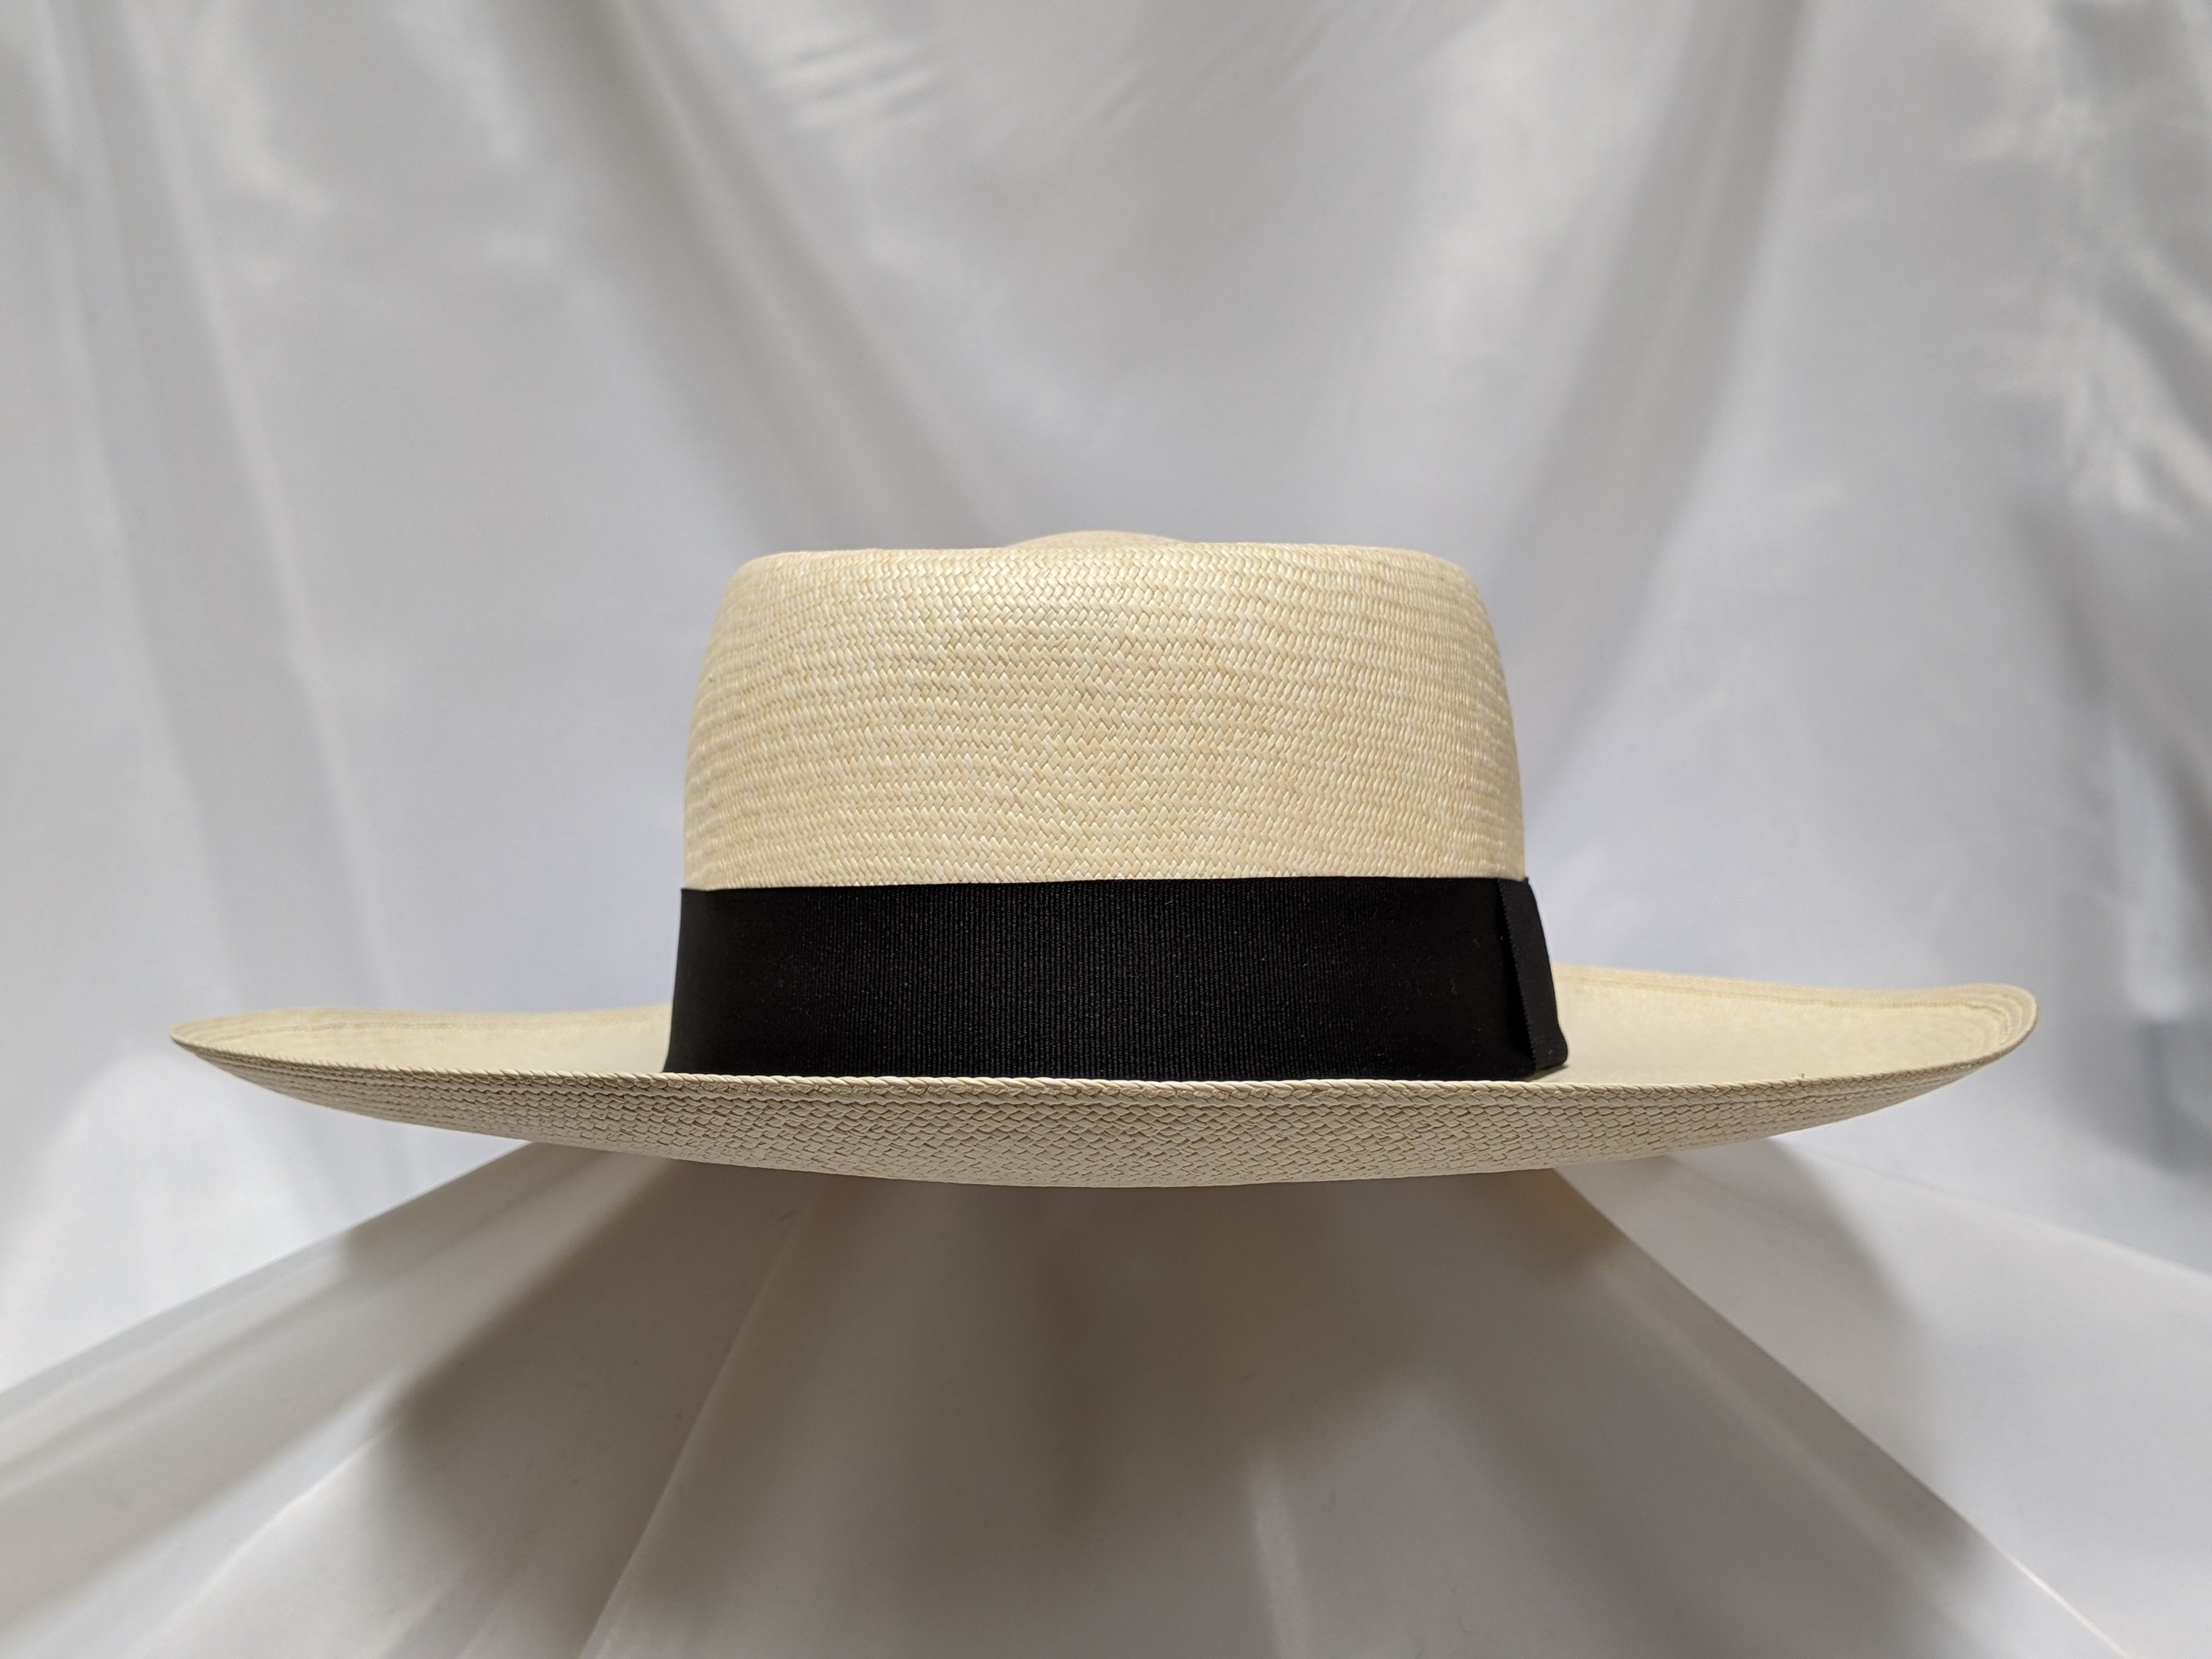 Which stiffener should I use? - Learn How To Make Hats Online